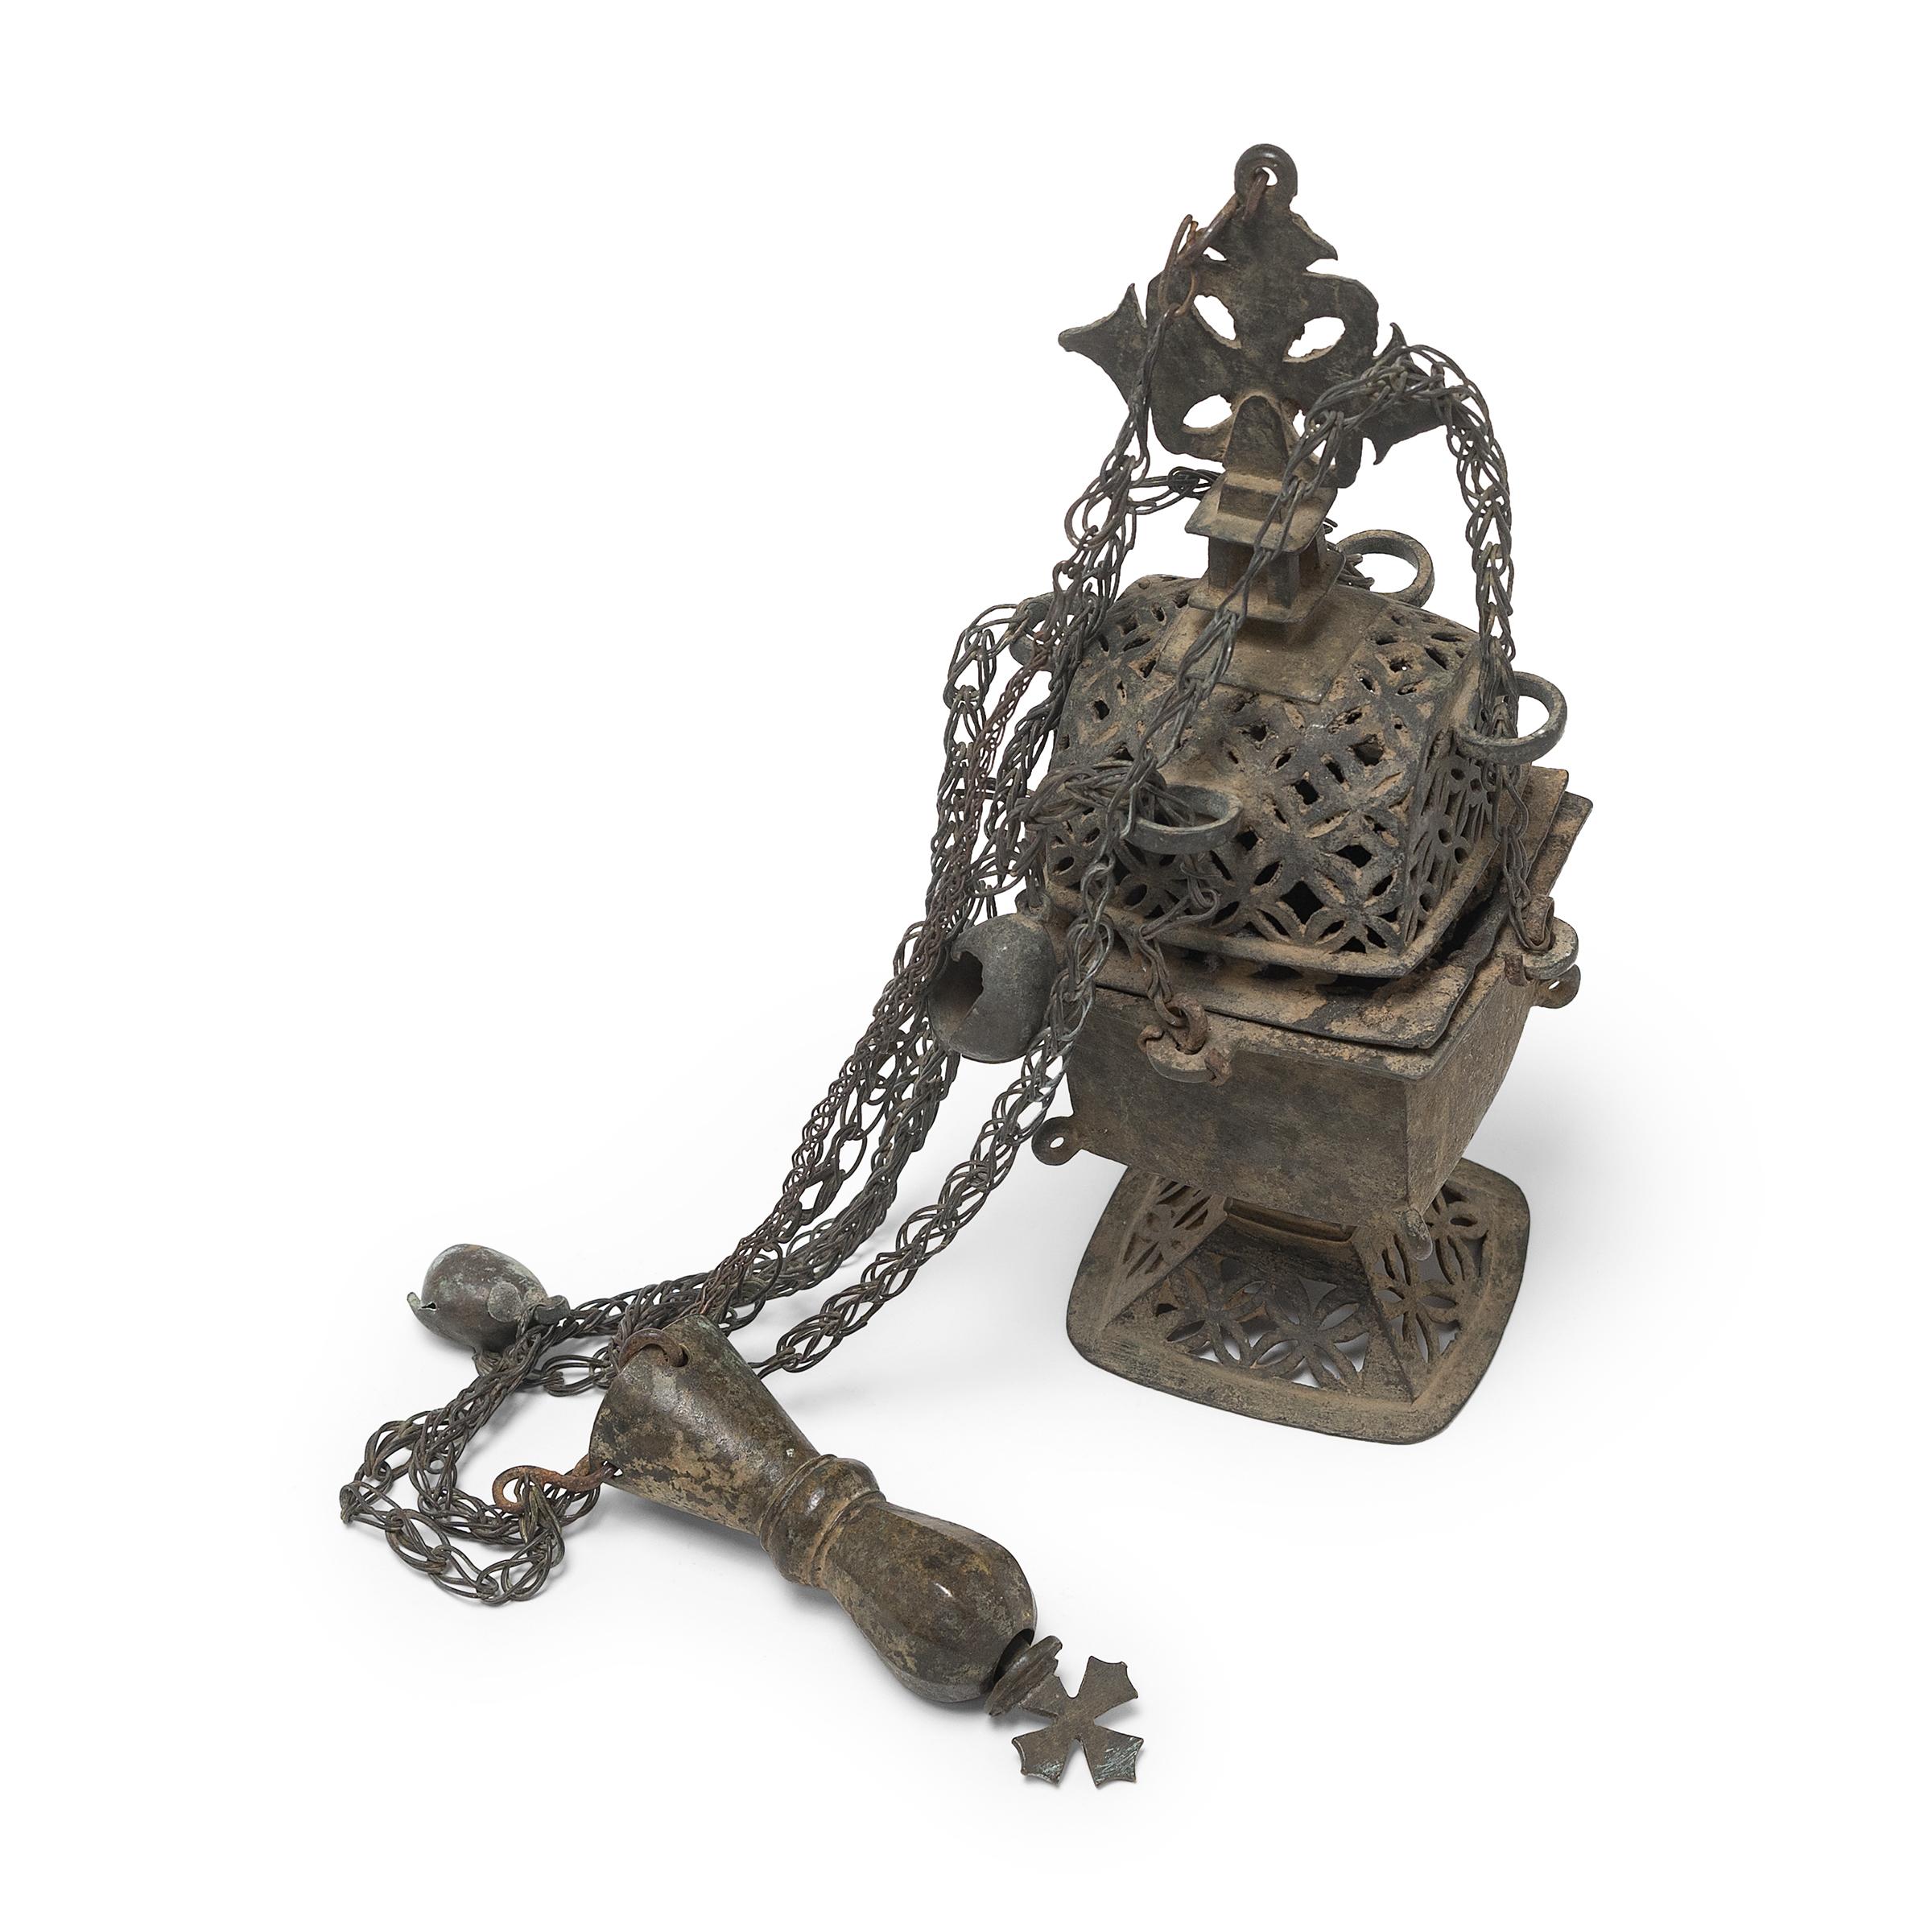 This sculptural bronze object is a 19th-century liturgical censer, or thurible, used for guided prayer and ritual ceremony within the Coptic Orthodox Church. Blessed by the Priest prior to use, the censer was lit with incense such as frankincense,